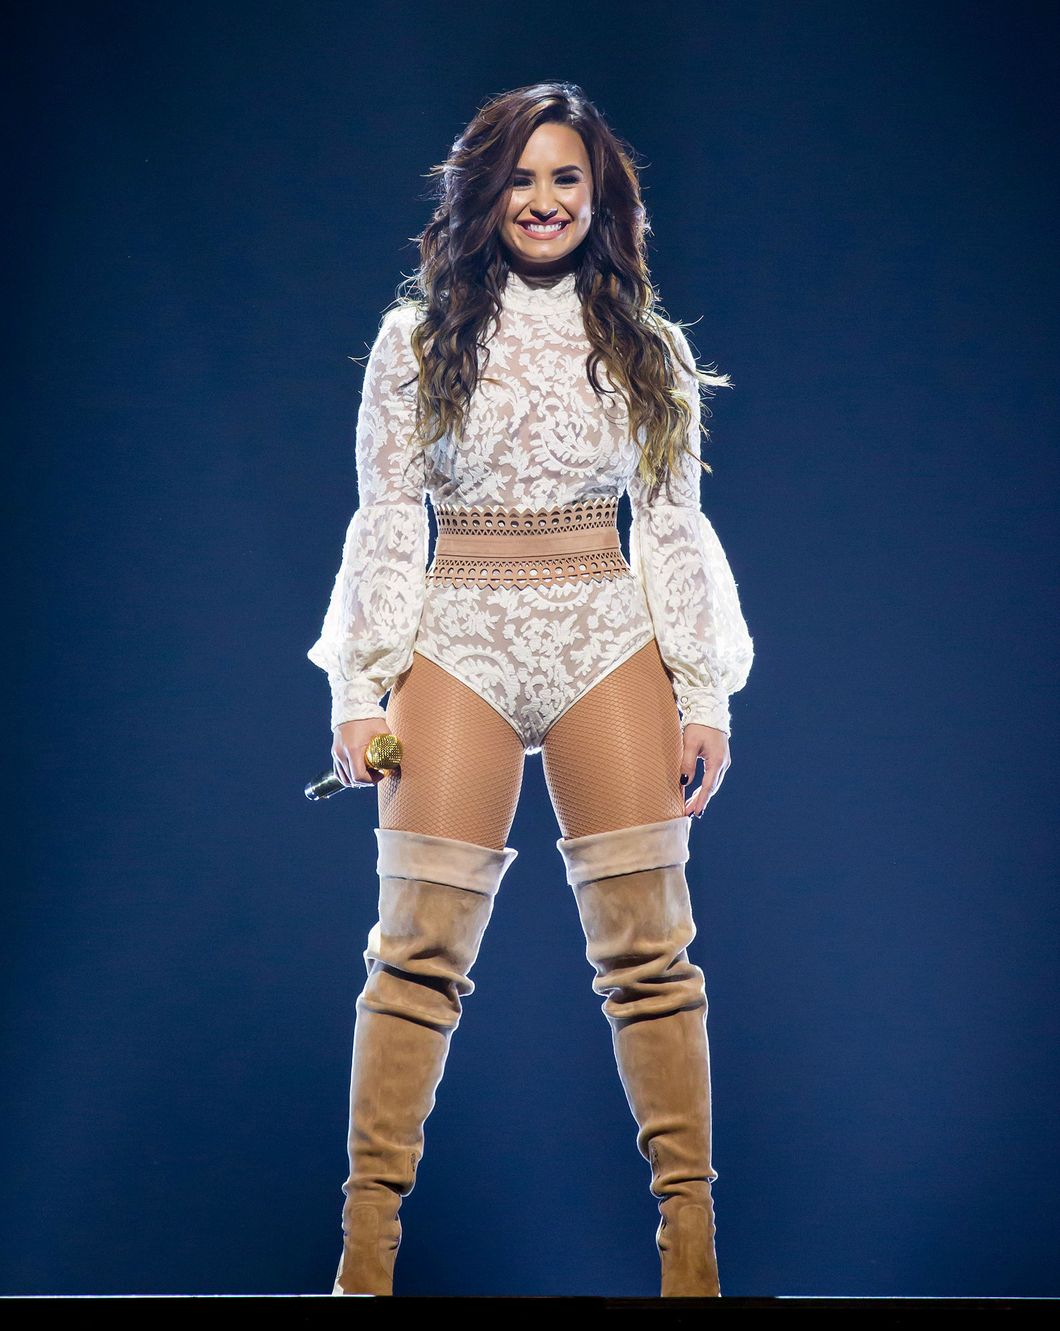 16 Demi Lovato Songs That Reaffirm Her Talent Instead Of Focusing On Her Personal Struggles